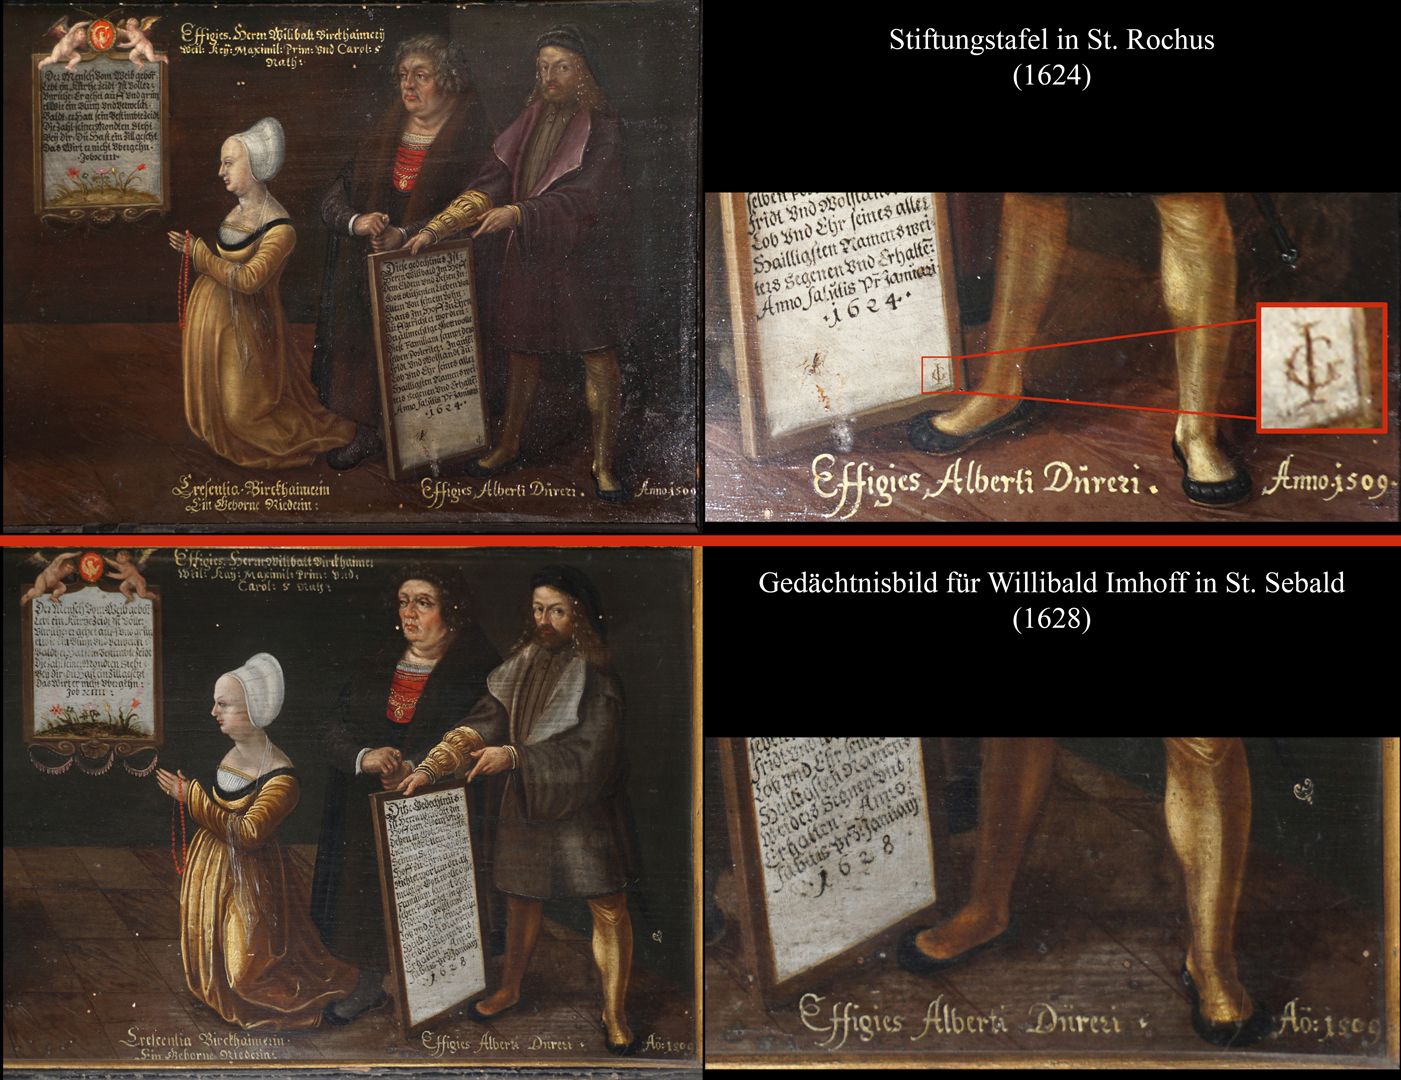 MemoriaL tablet for Willibald Imhoff Image comparison with the so-called Dürer Foundation Tablet in the Rochus Chapel / dates 1624 and 1628